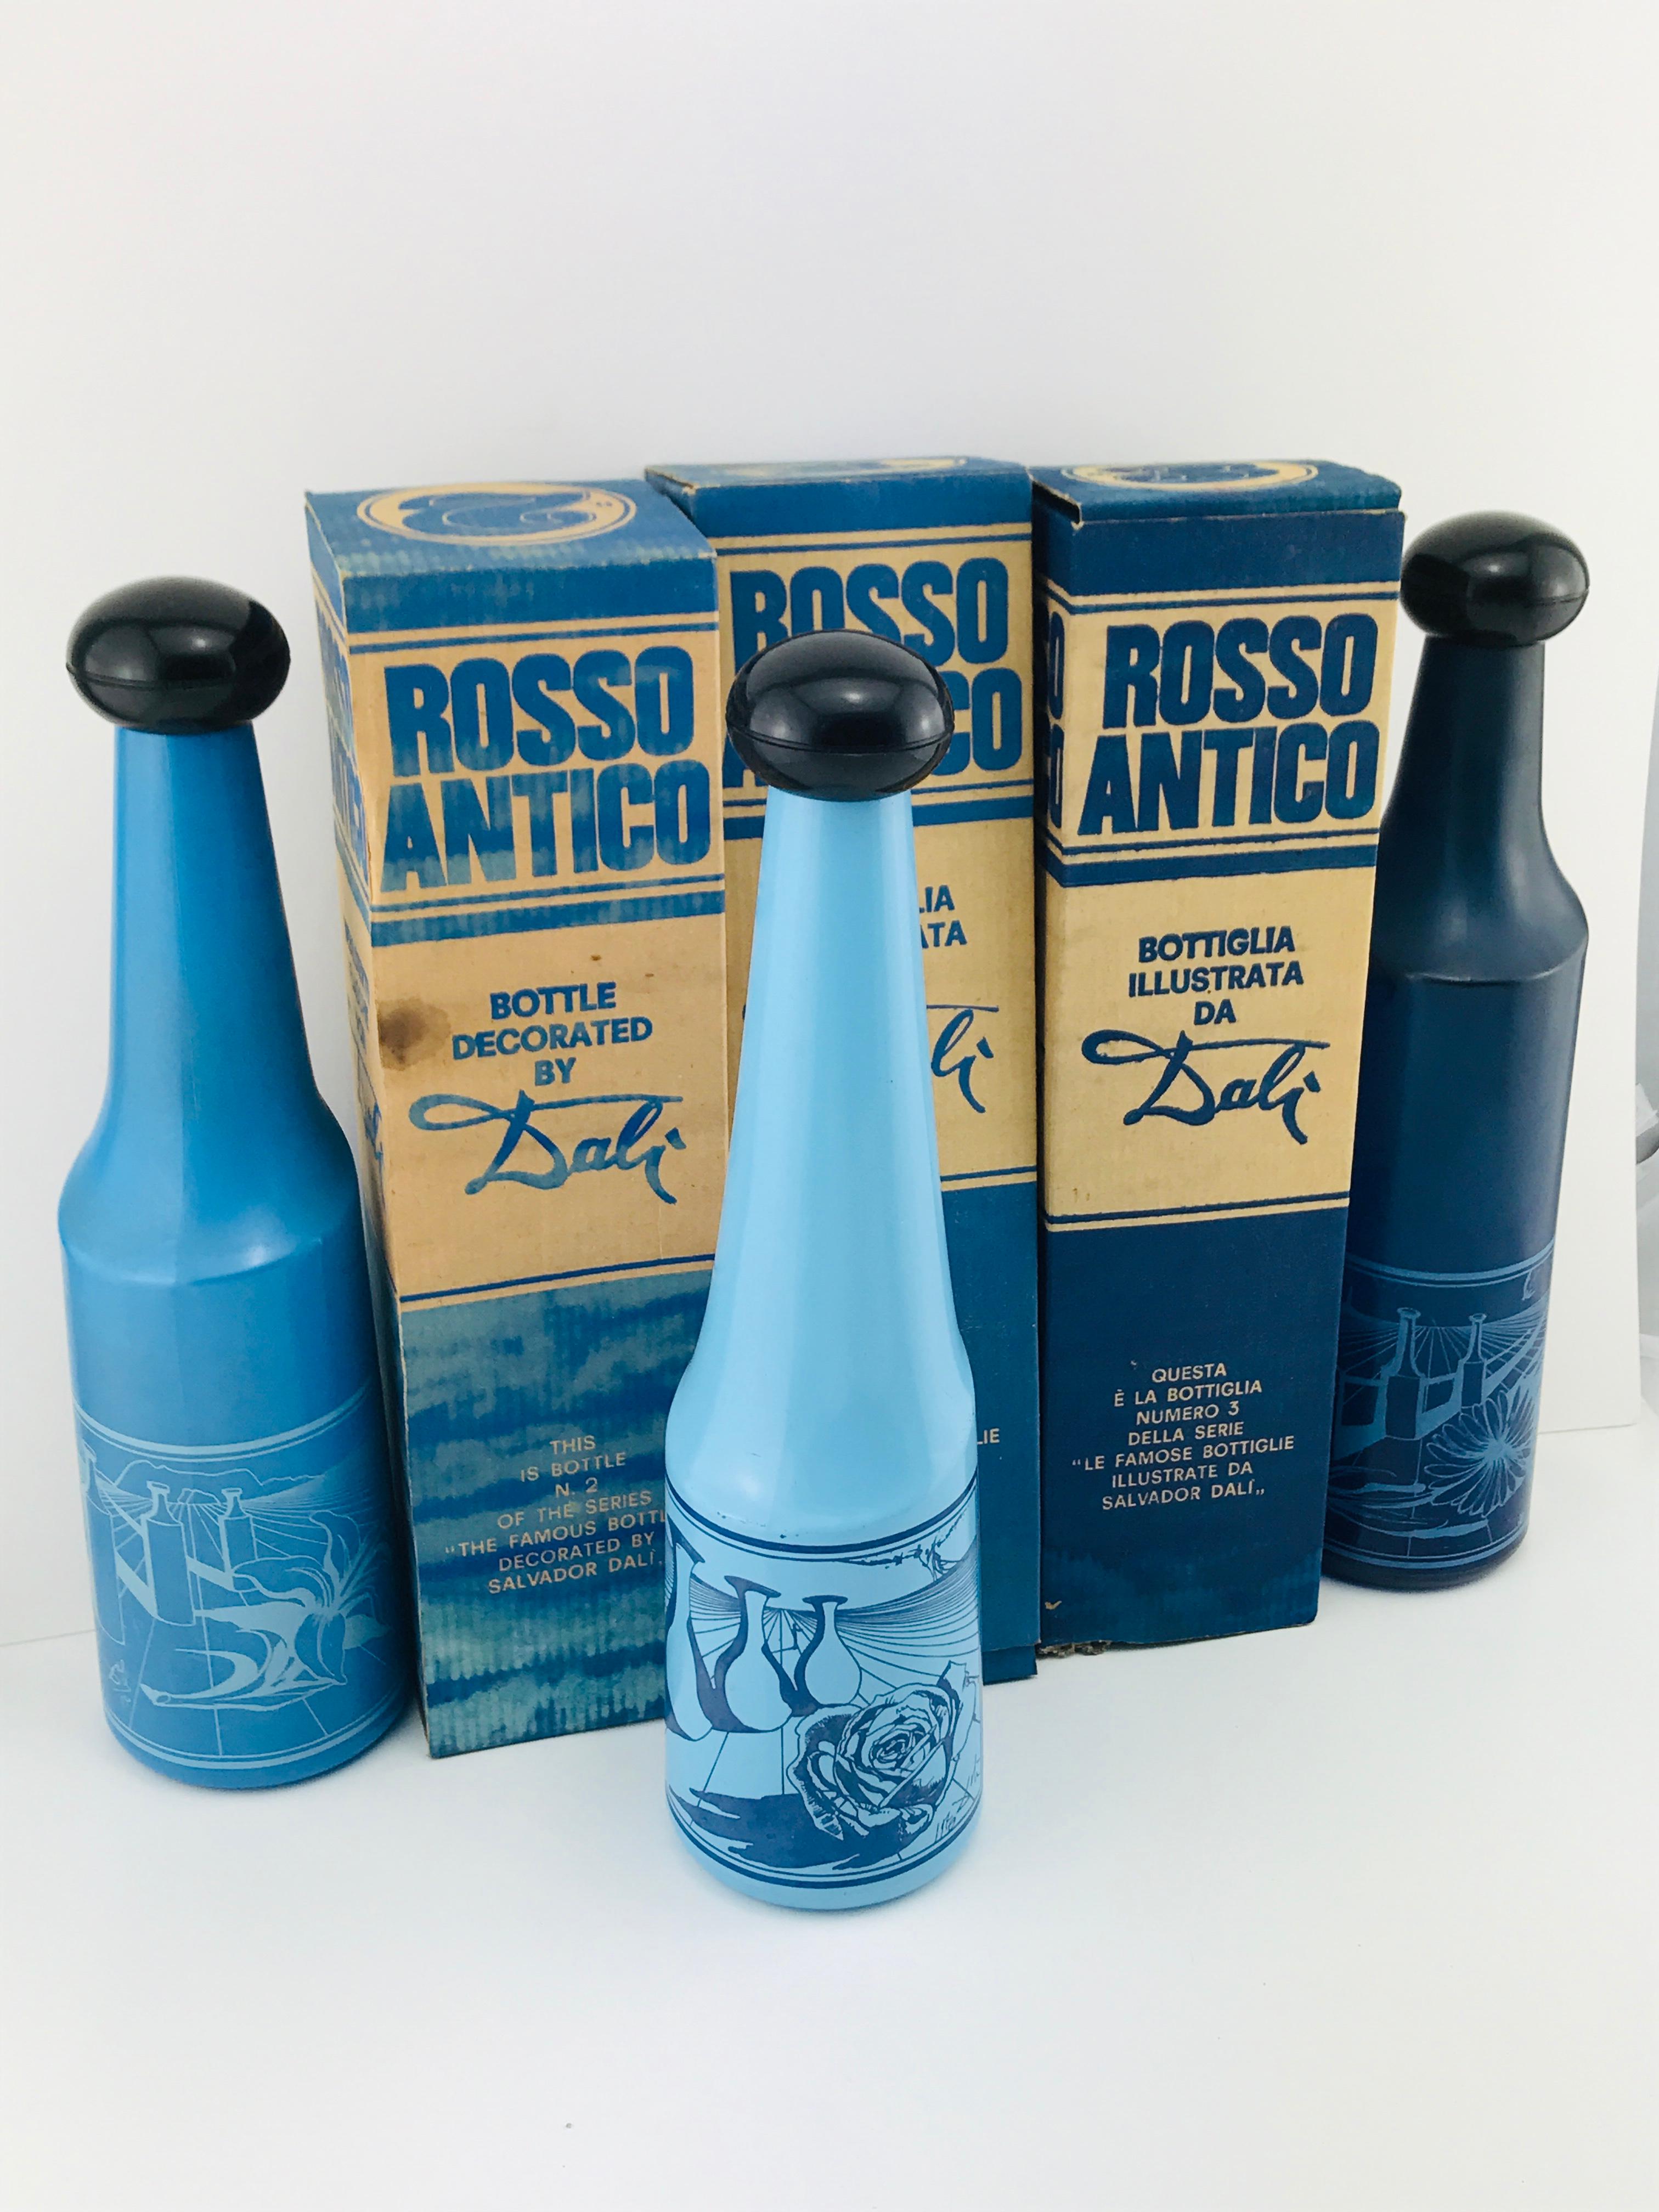 Excellent vintage condition original stoppers in tact
Beautiful succession of blue color light to dark
Each has a different serigraphed image created by Salvador Dali
Surrealist views of vineyards focusing on flower motif for each bottle with